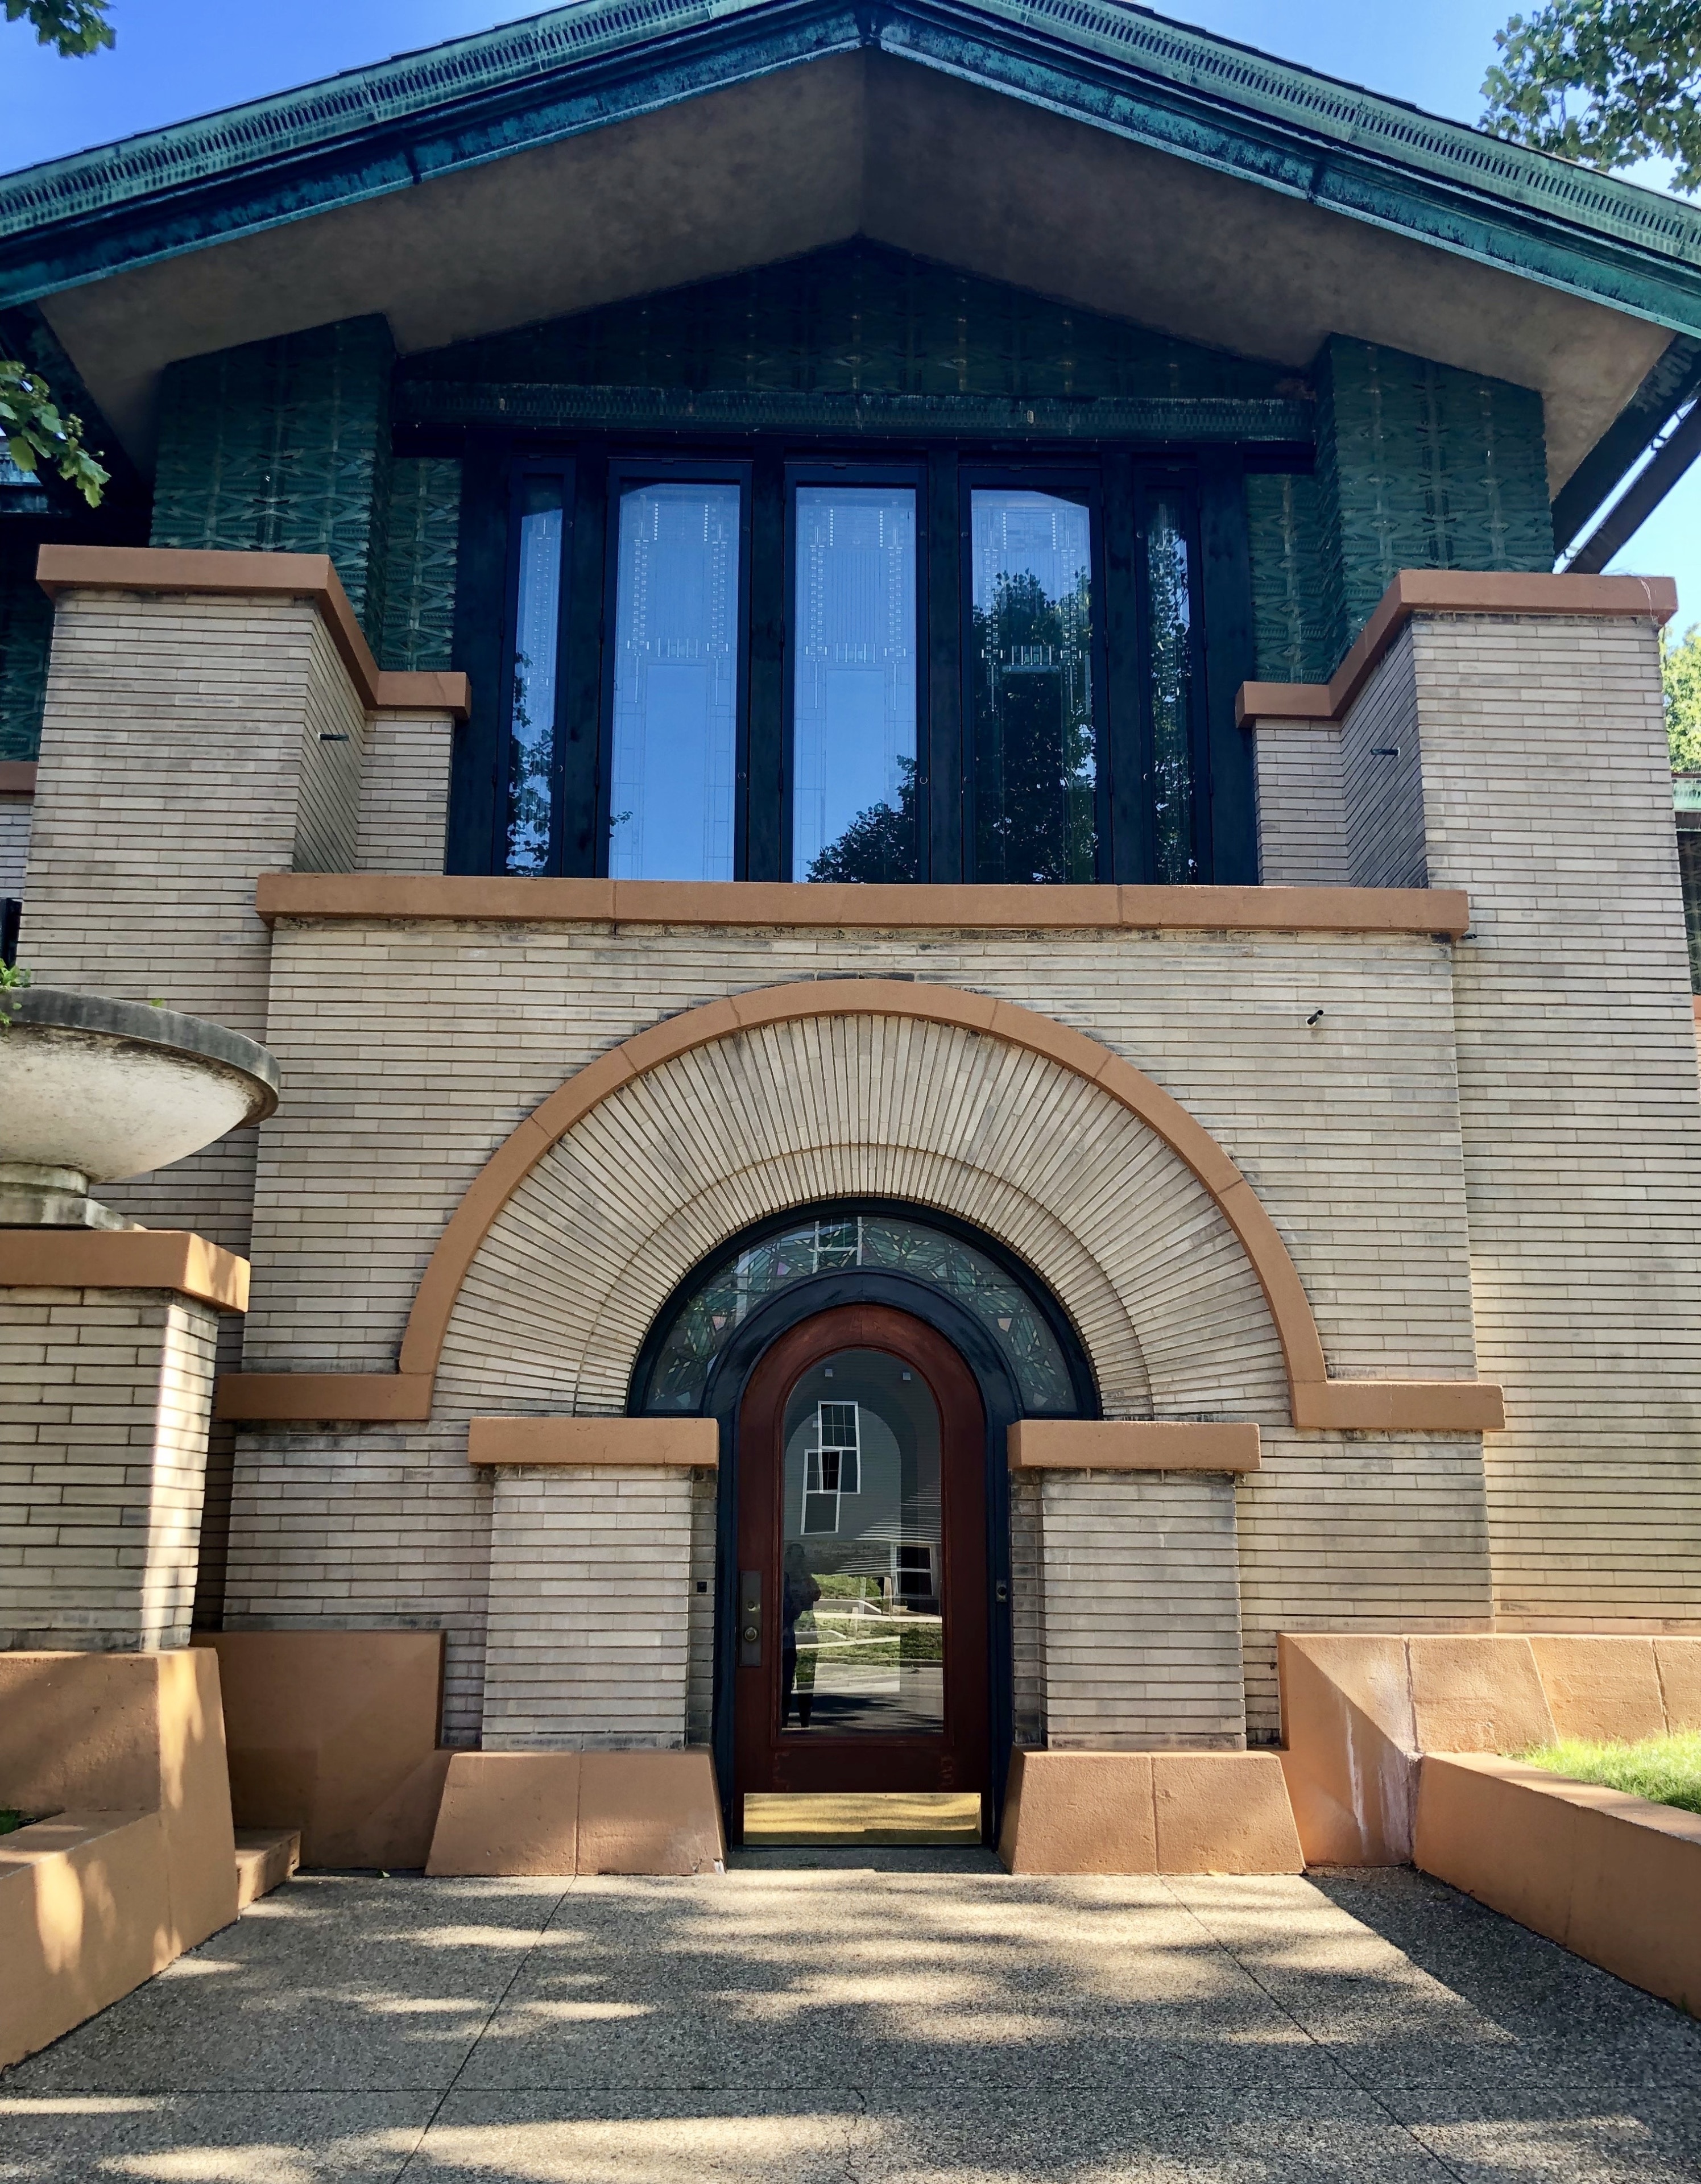 Front entry to the fabulous Dana-Thomas house. Built by Frank Lloyd Wright between 1902-04 for a local widow. The house has the largest number of FLW built furniture and art glass of any of his remaining properties.  Tours are offered and we would highly recommend them as this house is special!  (Also, no photos inside so you have to your to see it!)